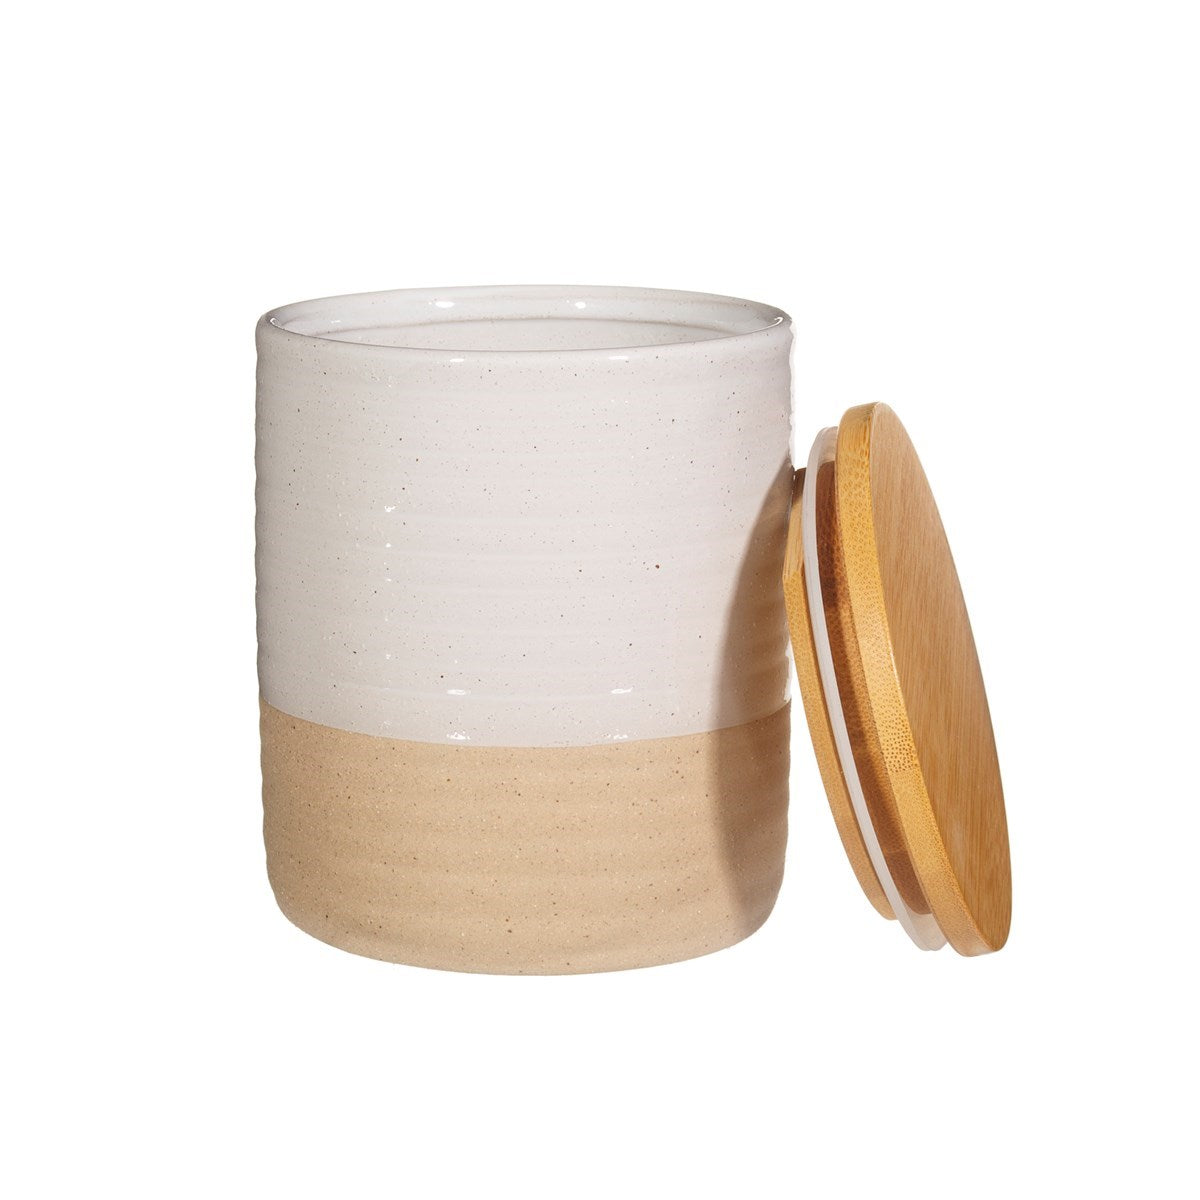 Sass & Belle Rustic White Half Glazed Storage Canister